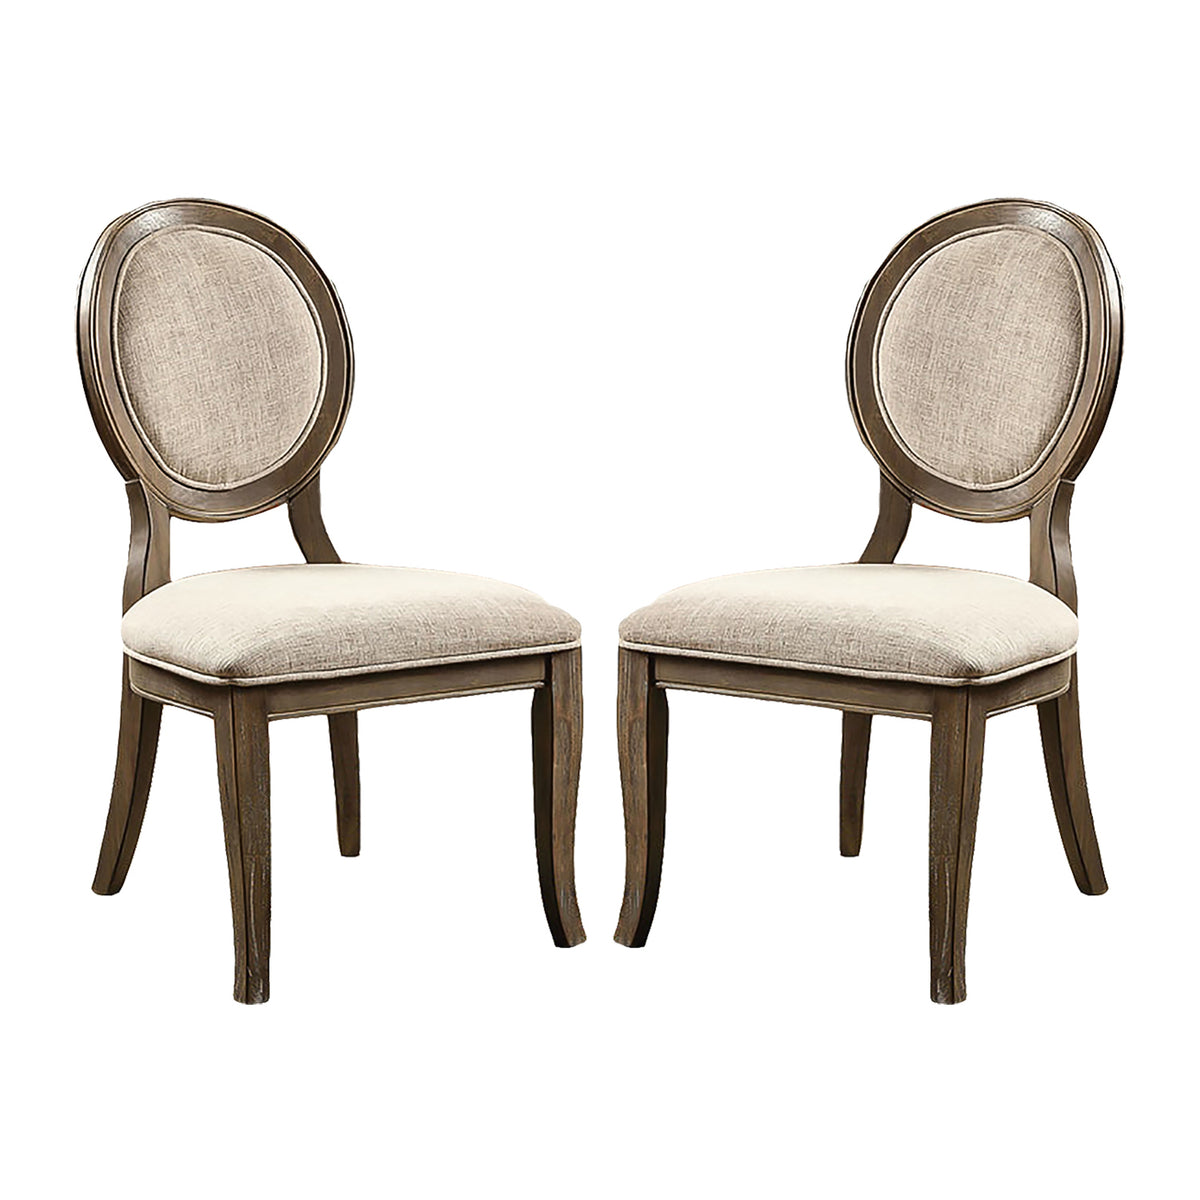 Set of 2 Padded Beige Fabric Dining Chairs in Rustic Oak Finish